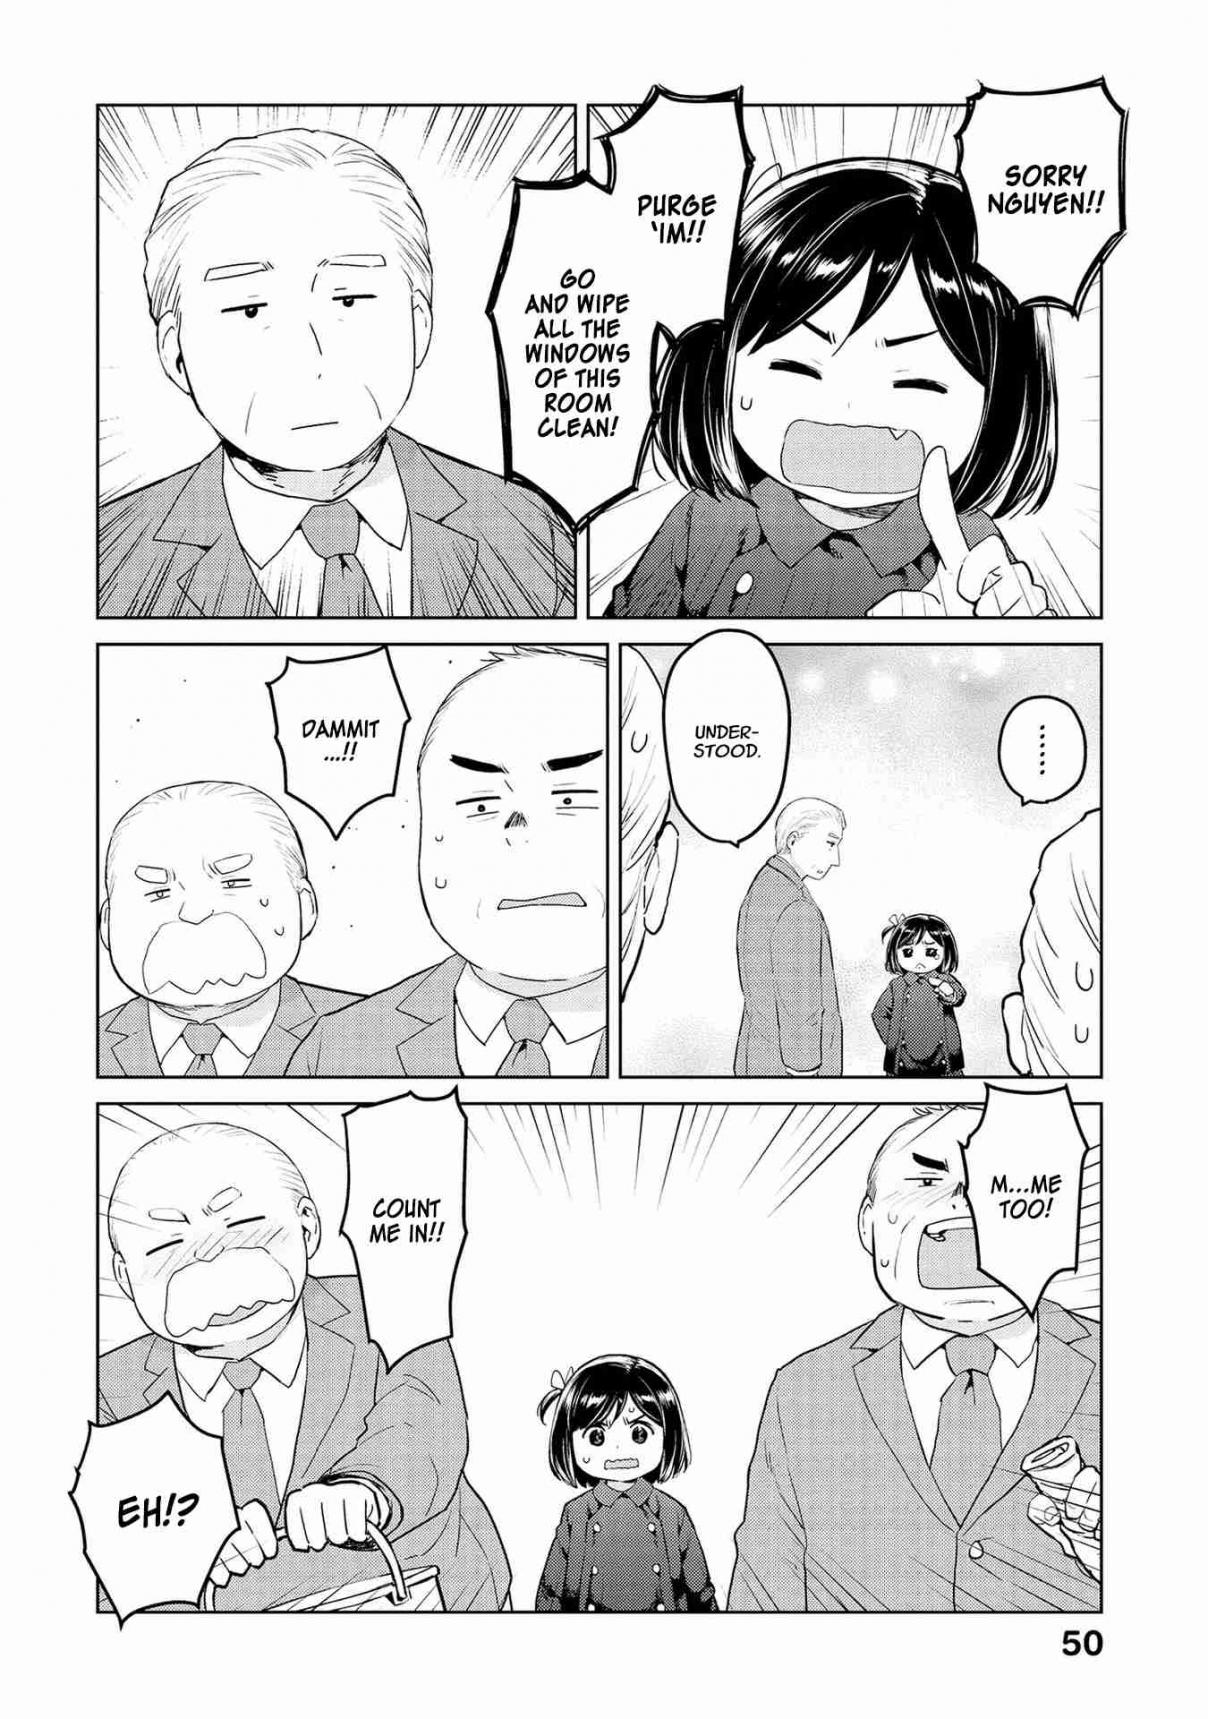 Oh, Our General Myao Vol. 3 Ch. 29 In which Myao finds it difficult to purge